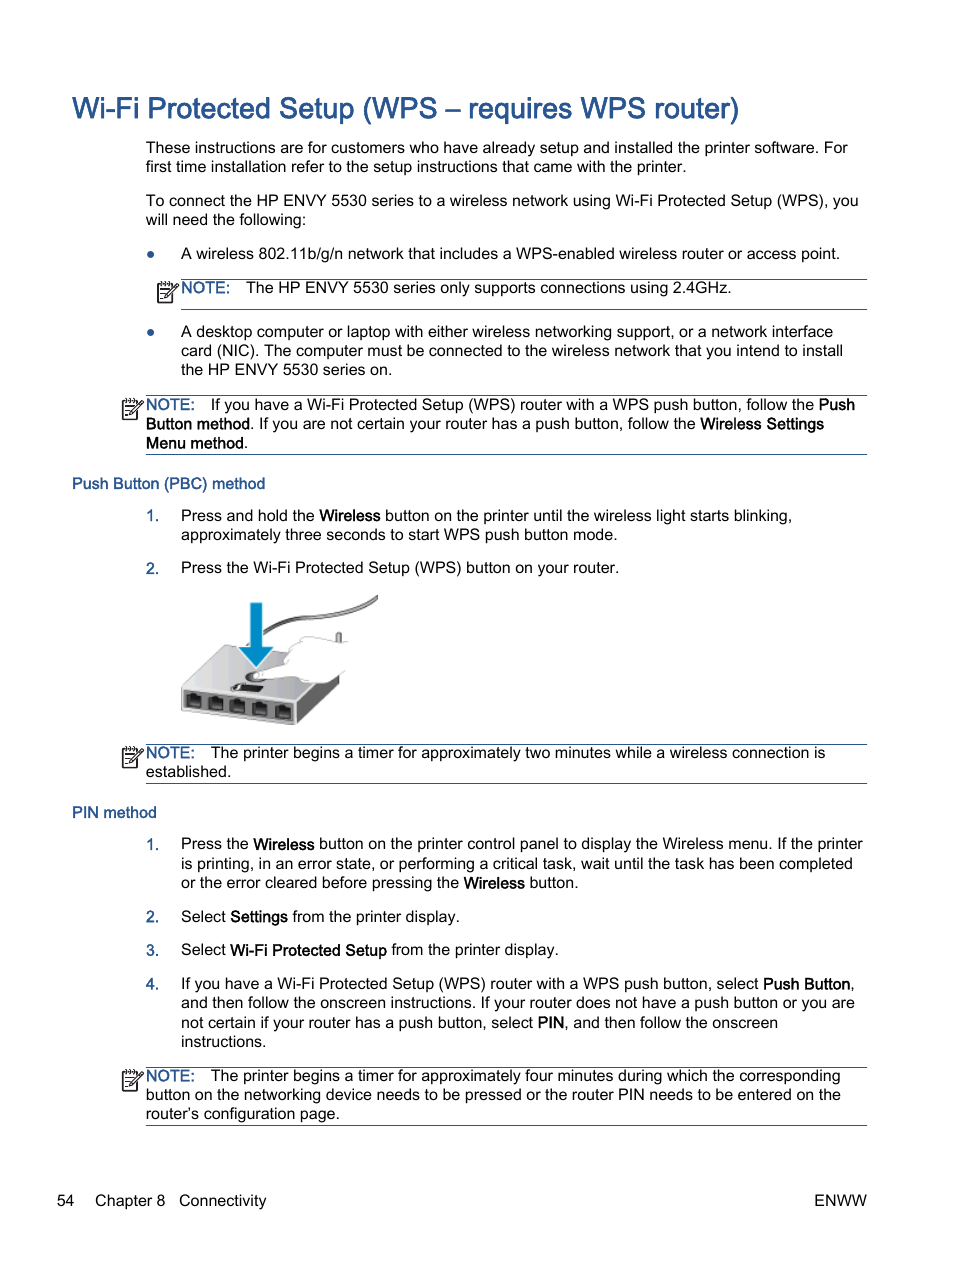 Wi-fi protected setup (wps – requires wps router) | HP ENVY 5530  e-All-in-One Printer User Manual | Page 58 / 108 | Original mode